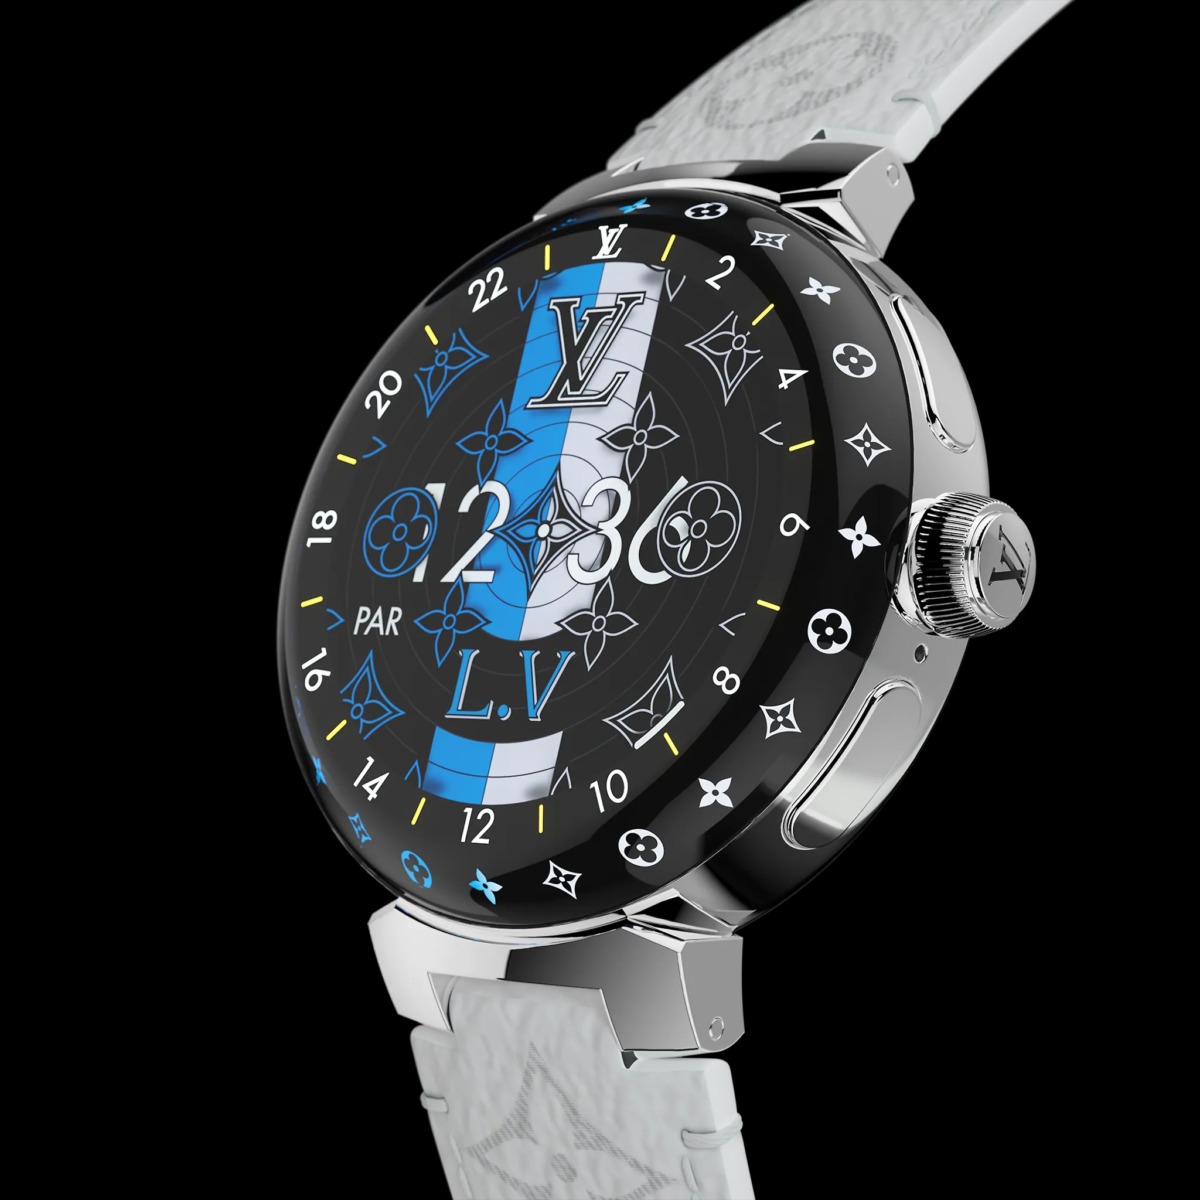 Tambour Horizon Light Up, the new connected watch from Louis Vuitton